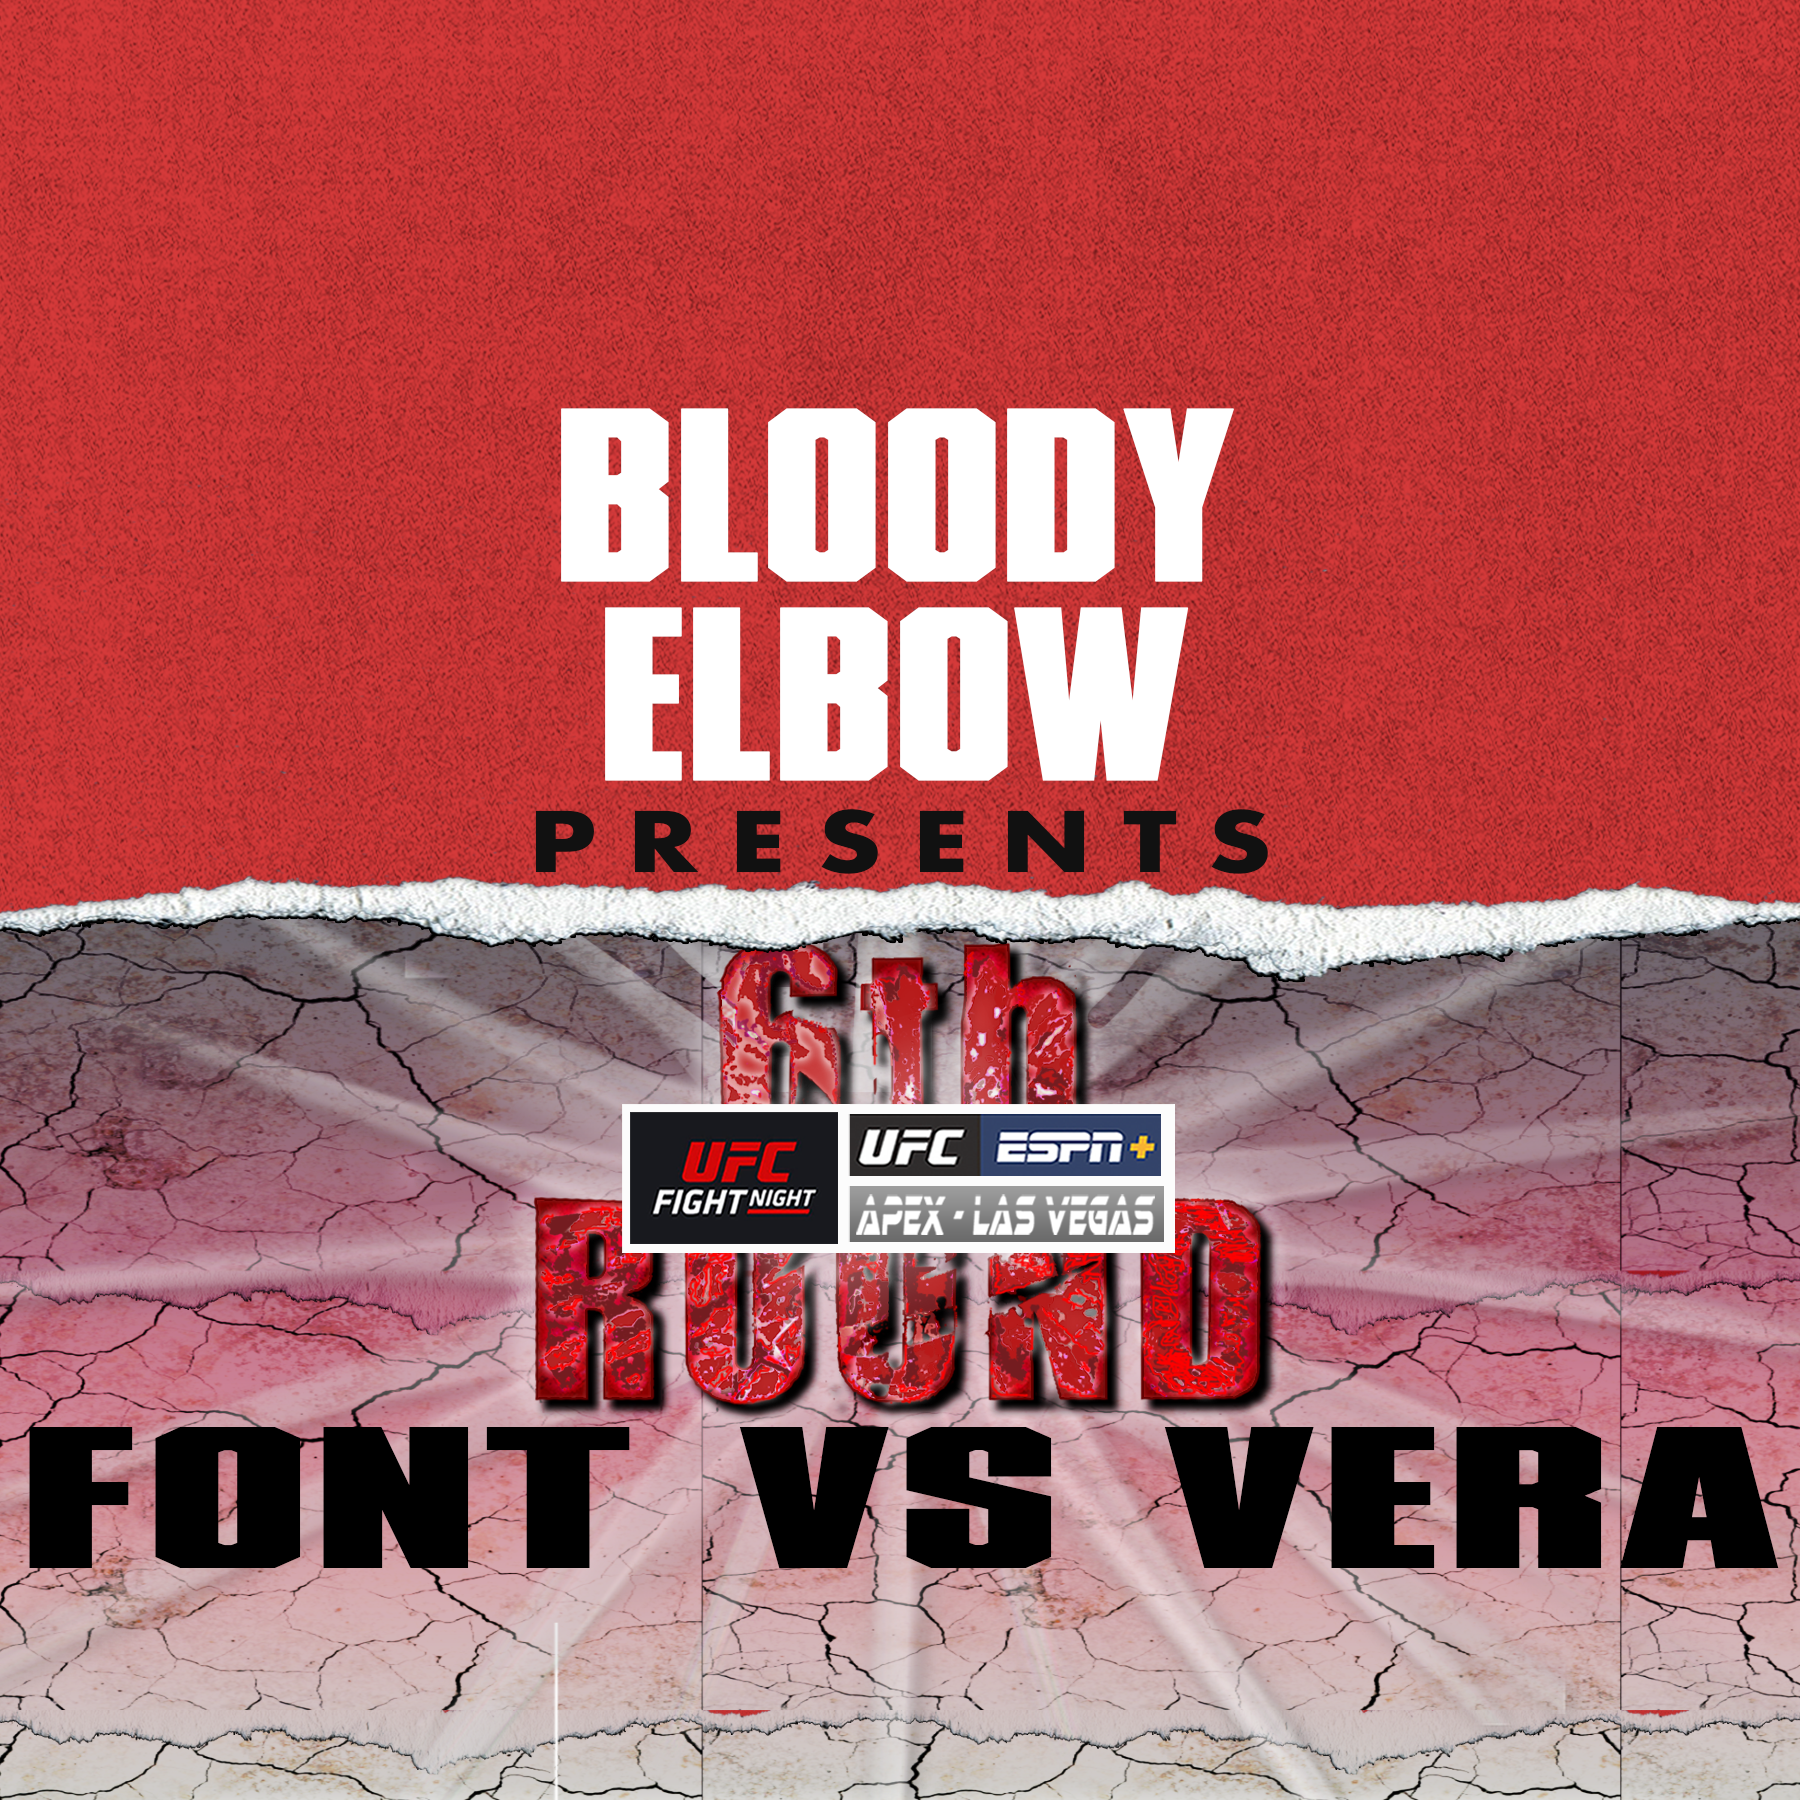 Post-Fight Show, UFC Post-Fight Show, 6th Rd, 6th Round Post-Fight Show, Zane Simon, Eddie Mercado, UFC Results, UFC Reactions, UFC Hot Takes, UFC Possible Next Fights, UFC Vegas 53, UFC Fight Night, Rob Font vs Marlon Vera,